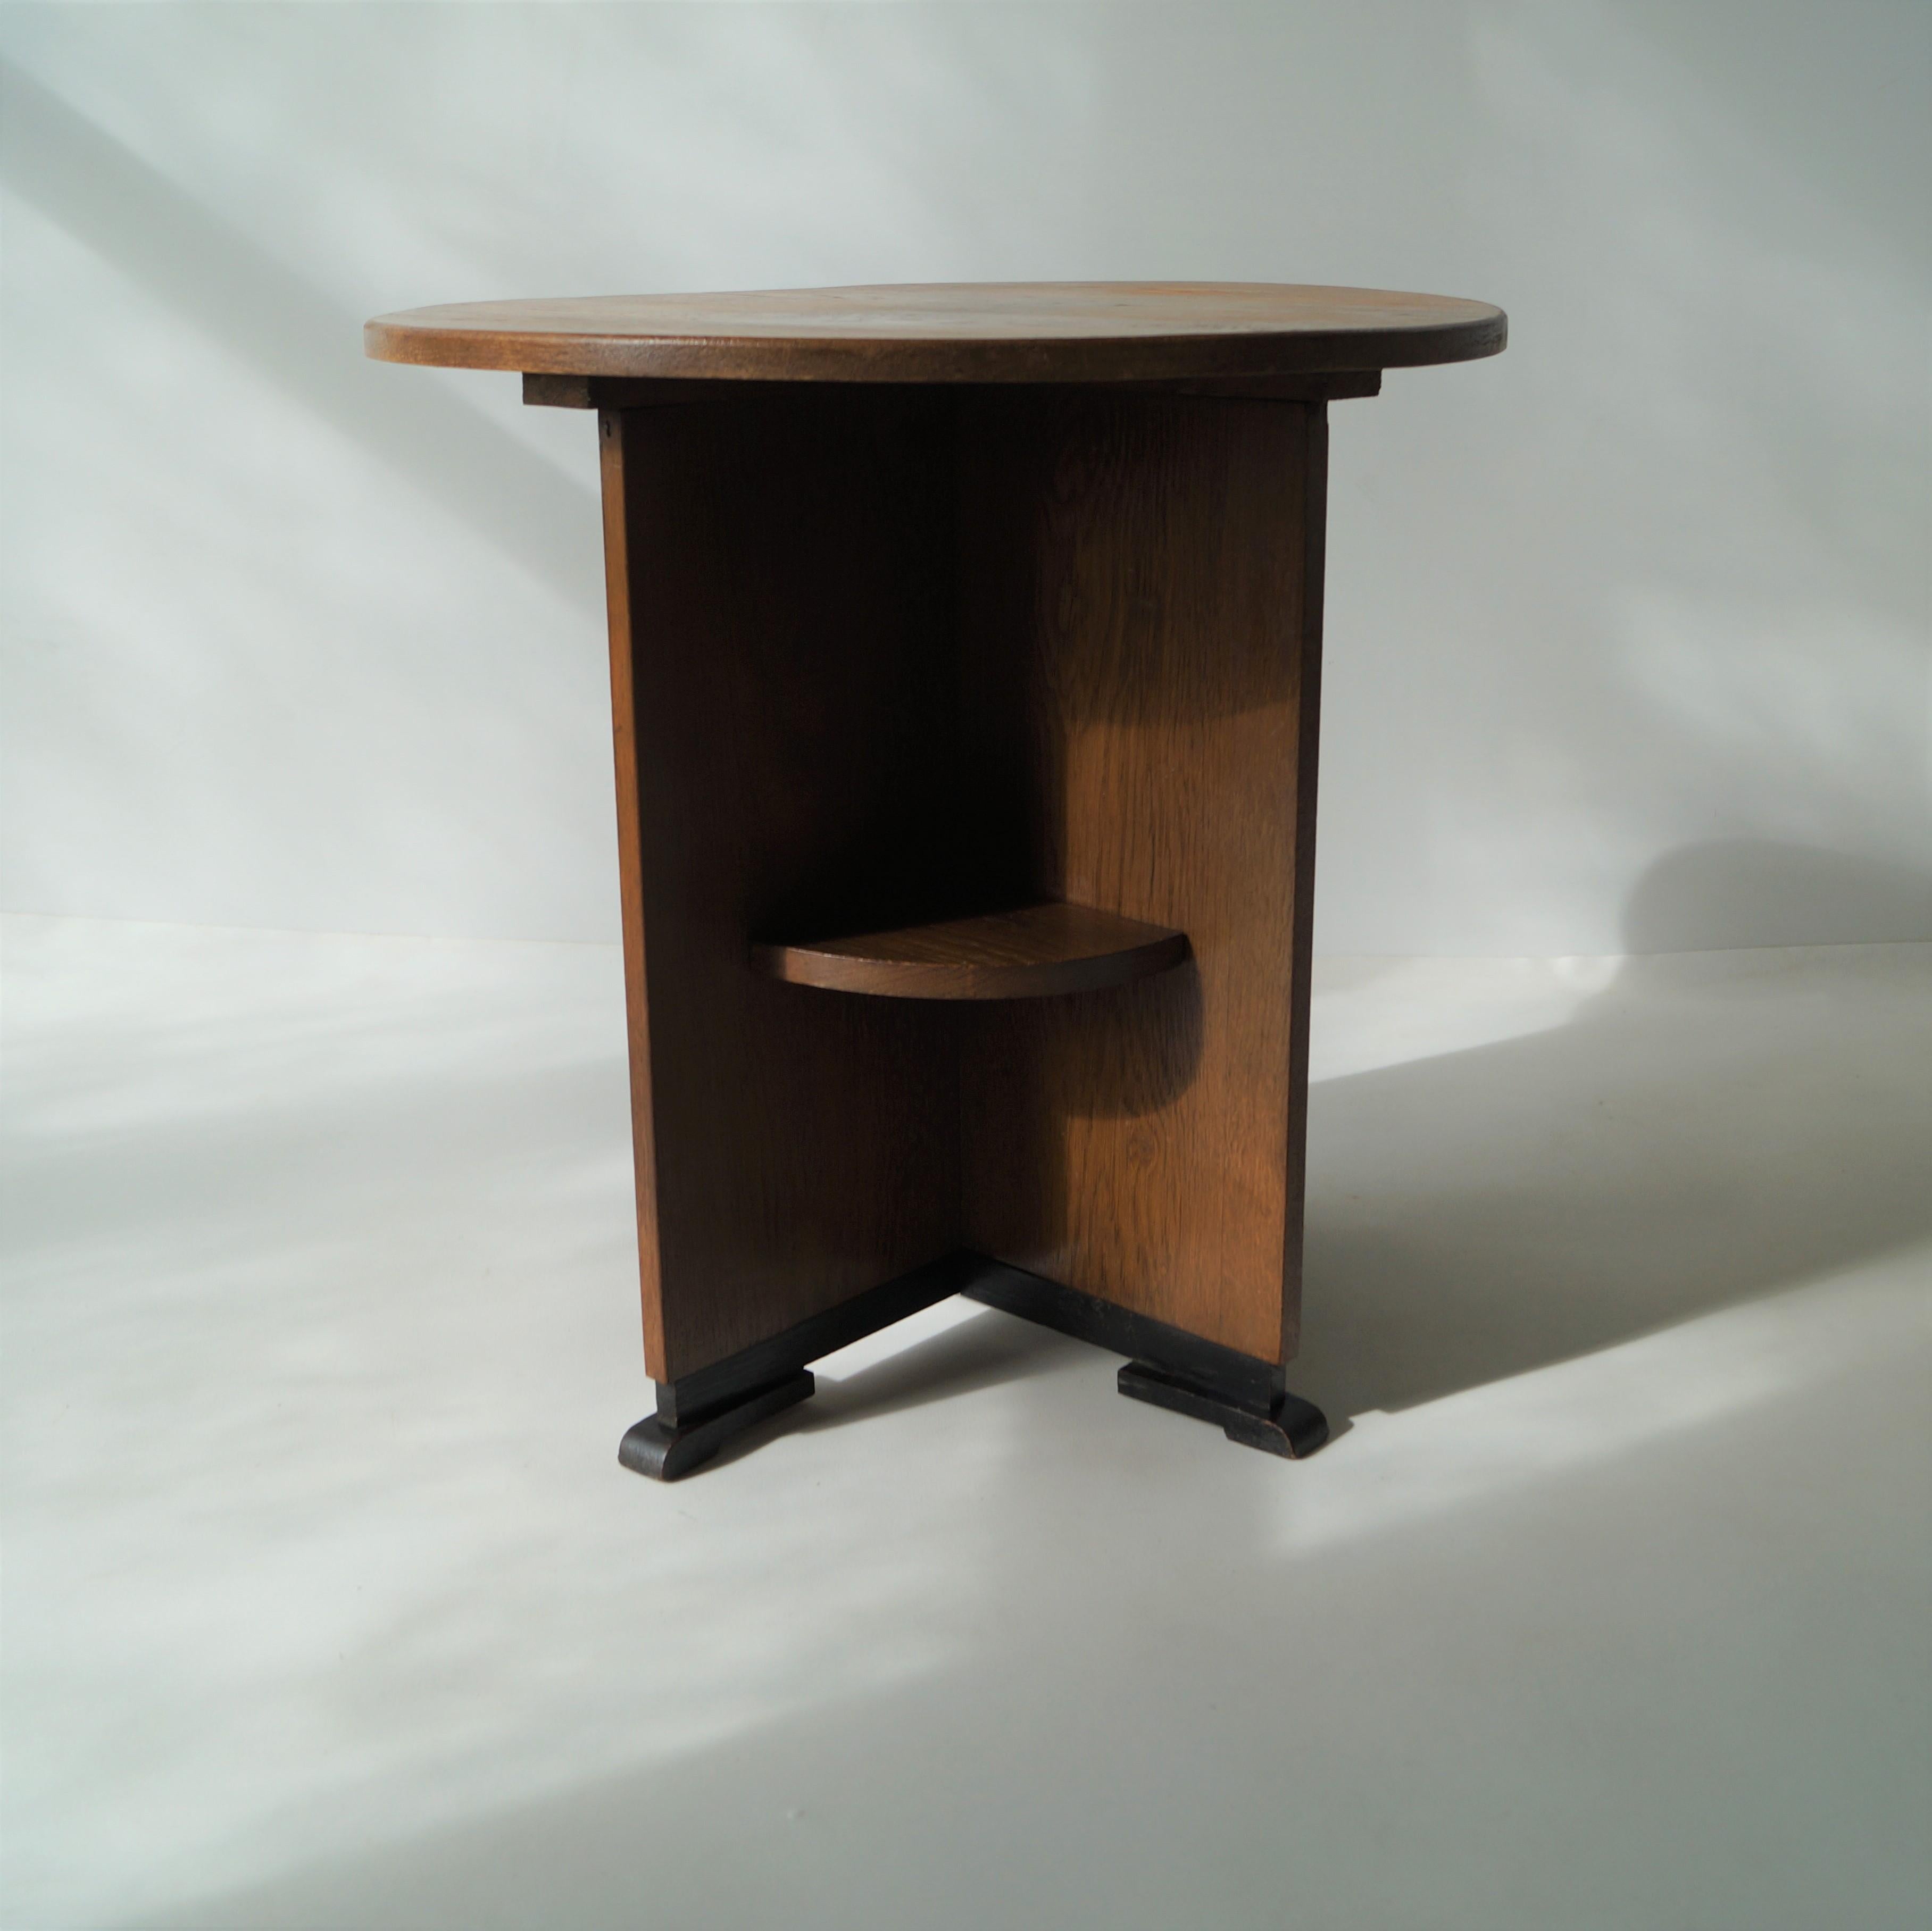 Oak Dutch Art Deco (Haagse School) Occasional Table with Modernist Lines, 1920s